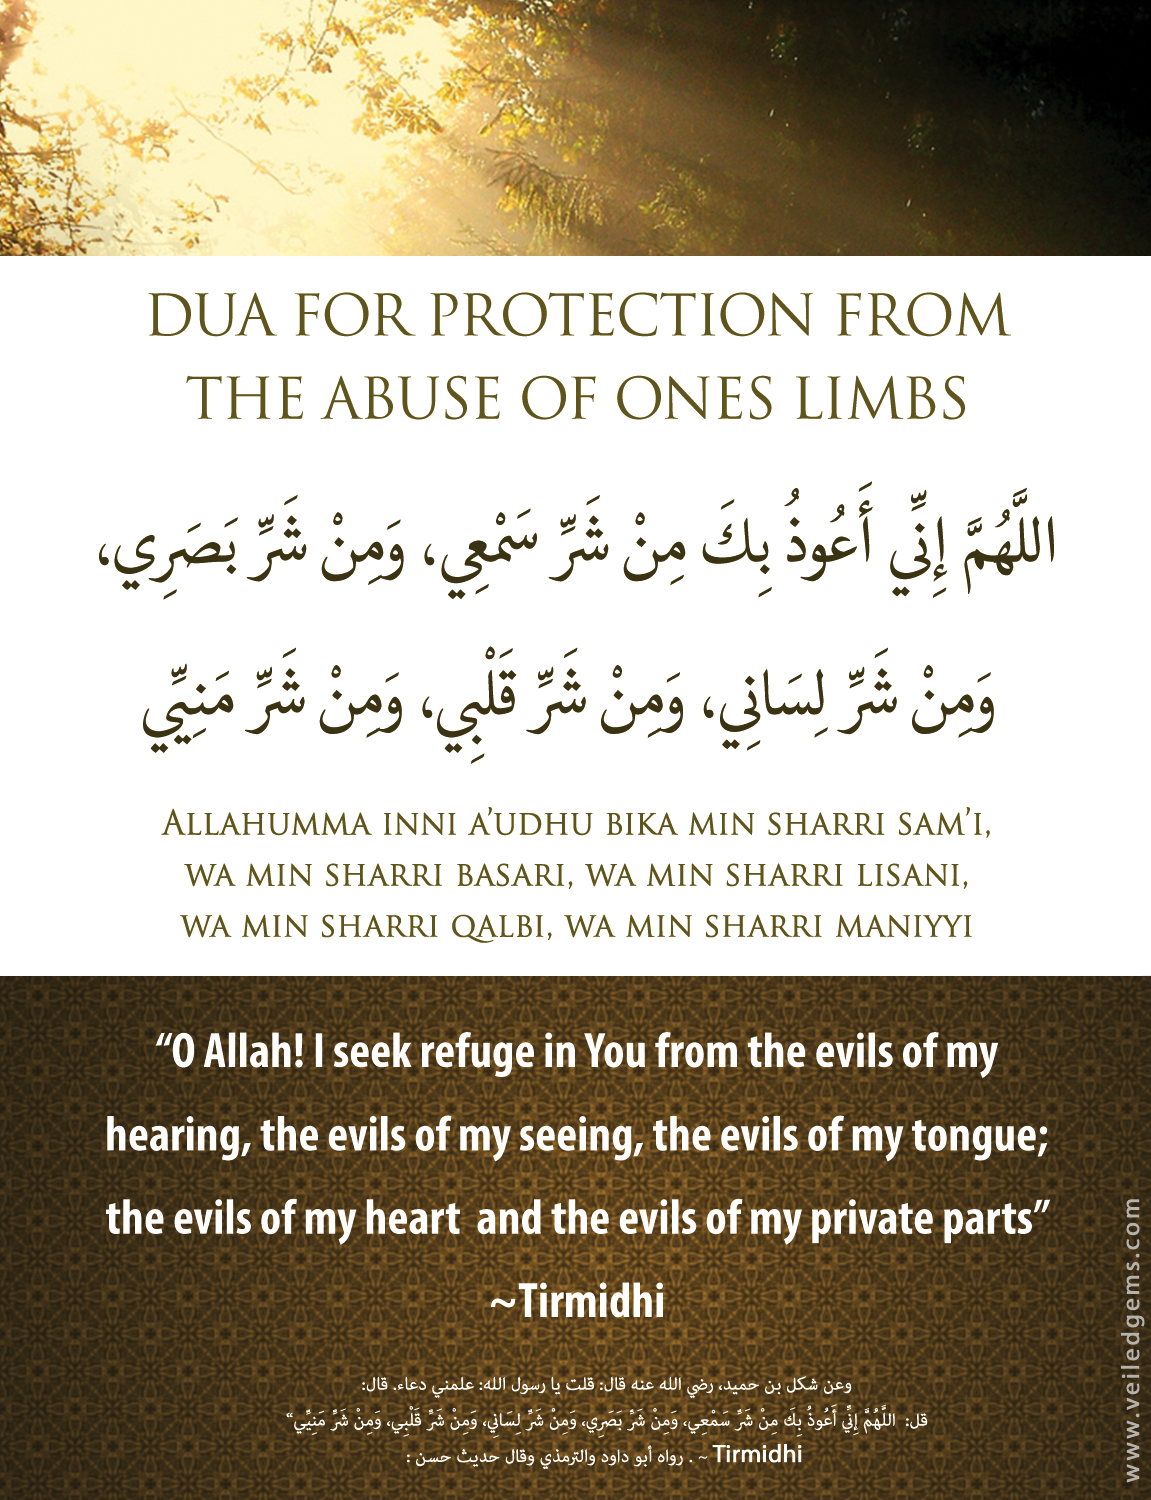 islaah.co.za.Dua.Protection.from.Abuse.Ones.Limbs